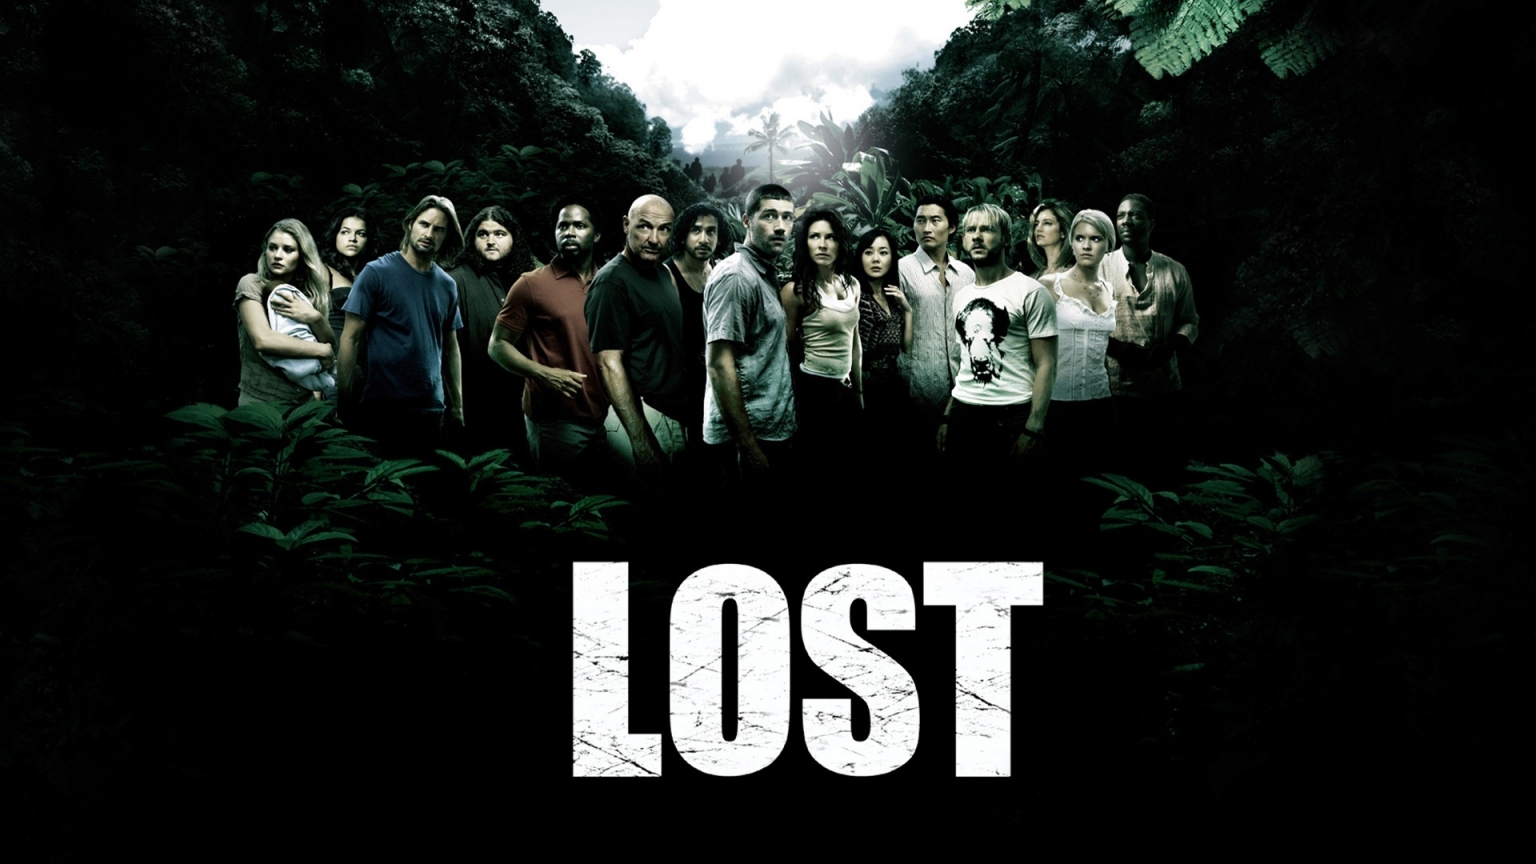 Lost Movie Group for 1536 x 864 HDTV resolution